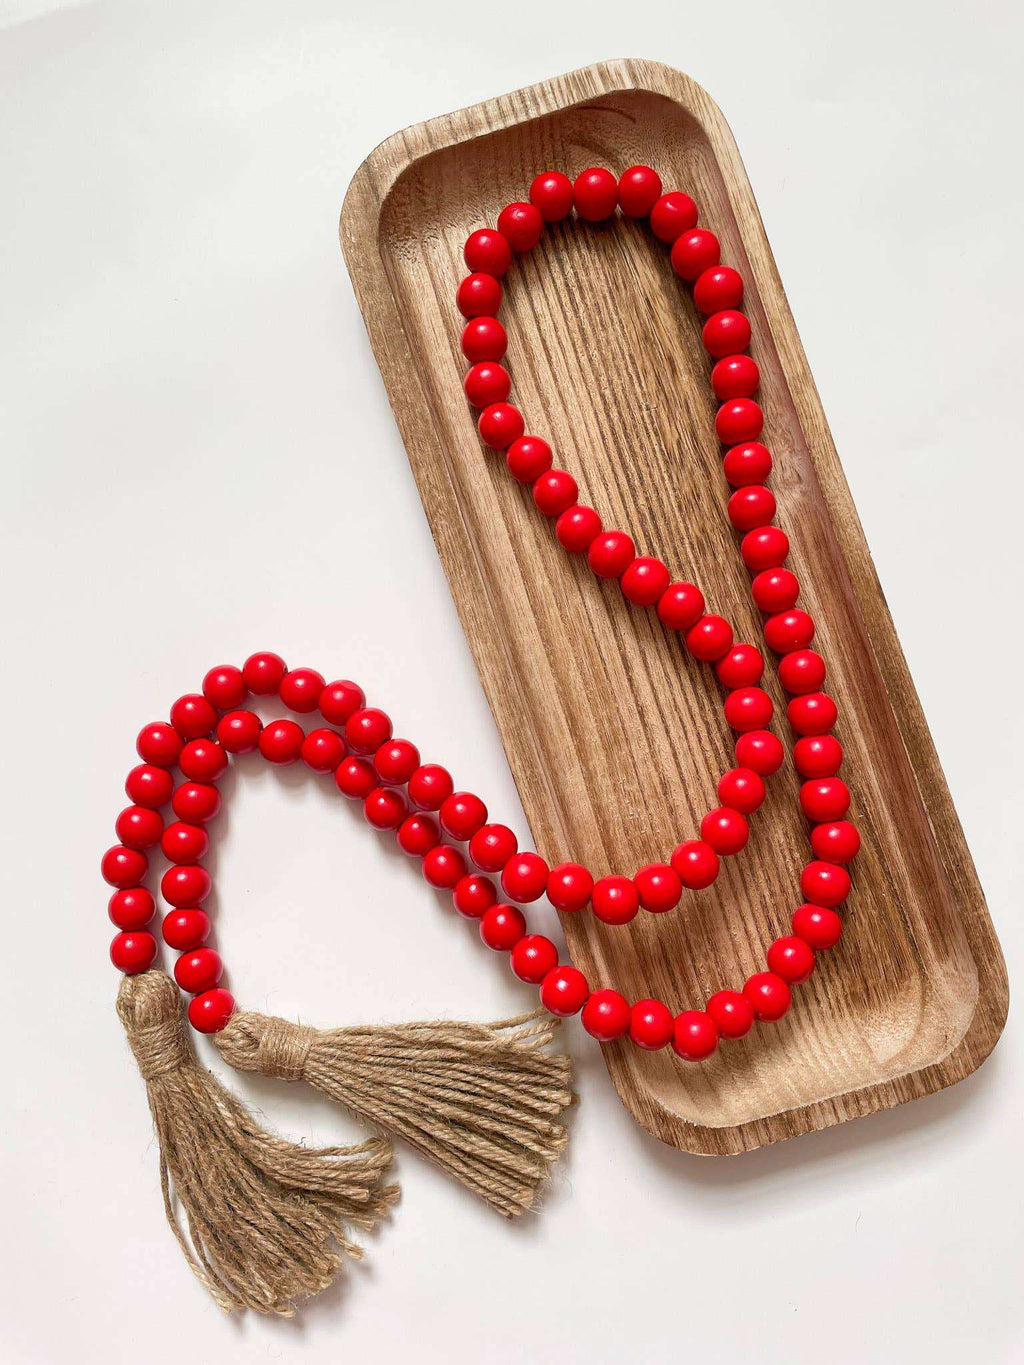 Eco-friendly Red Wood Bead Garland with Tassels